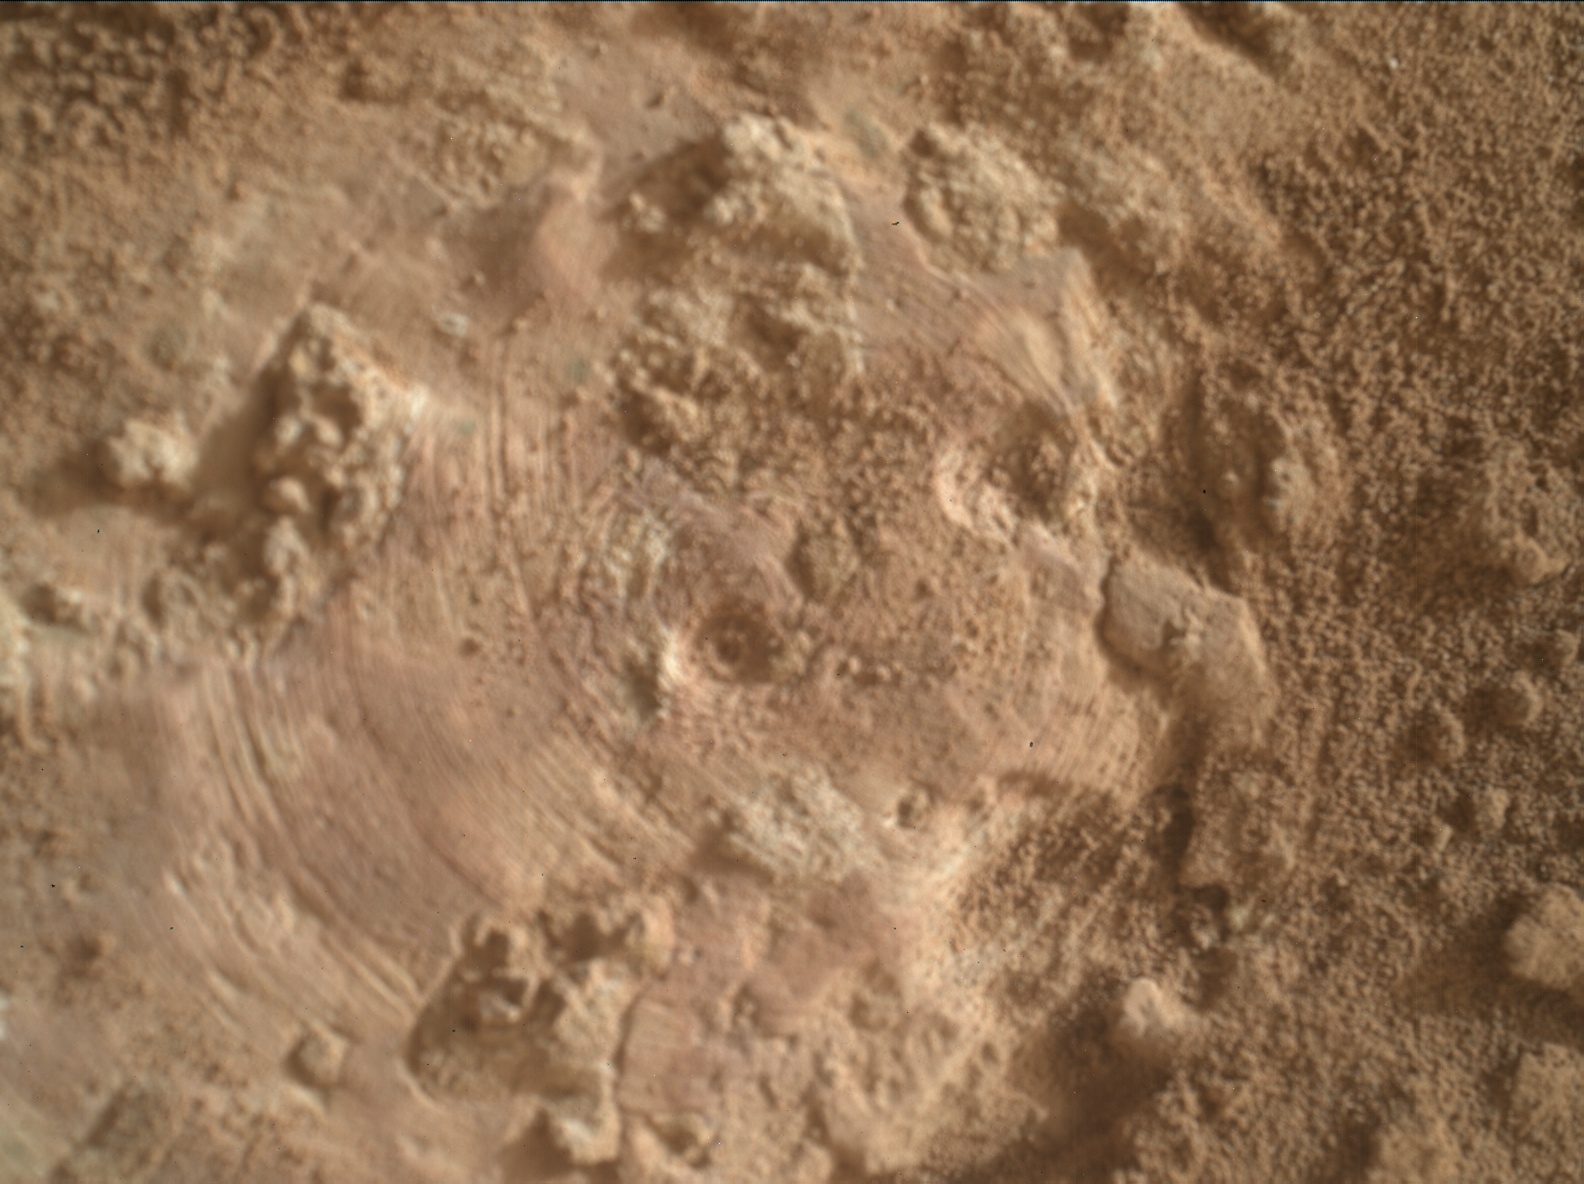 Nasa's Mars rover Curiosity acquired this image using its Mars Hand Lens Imager (MAHLI) on Sol 3641